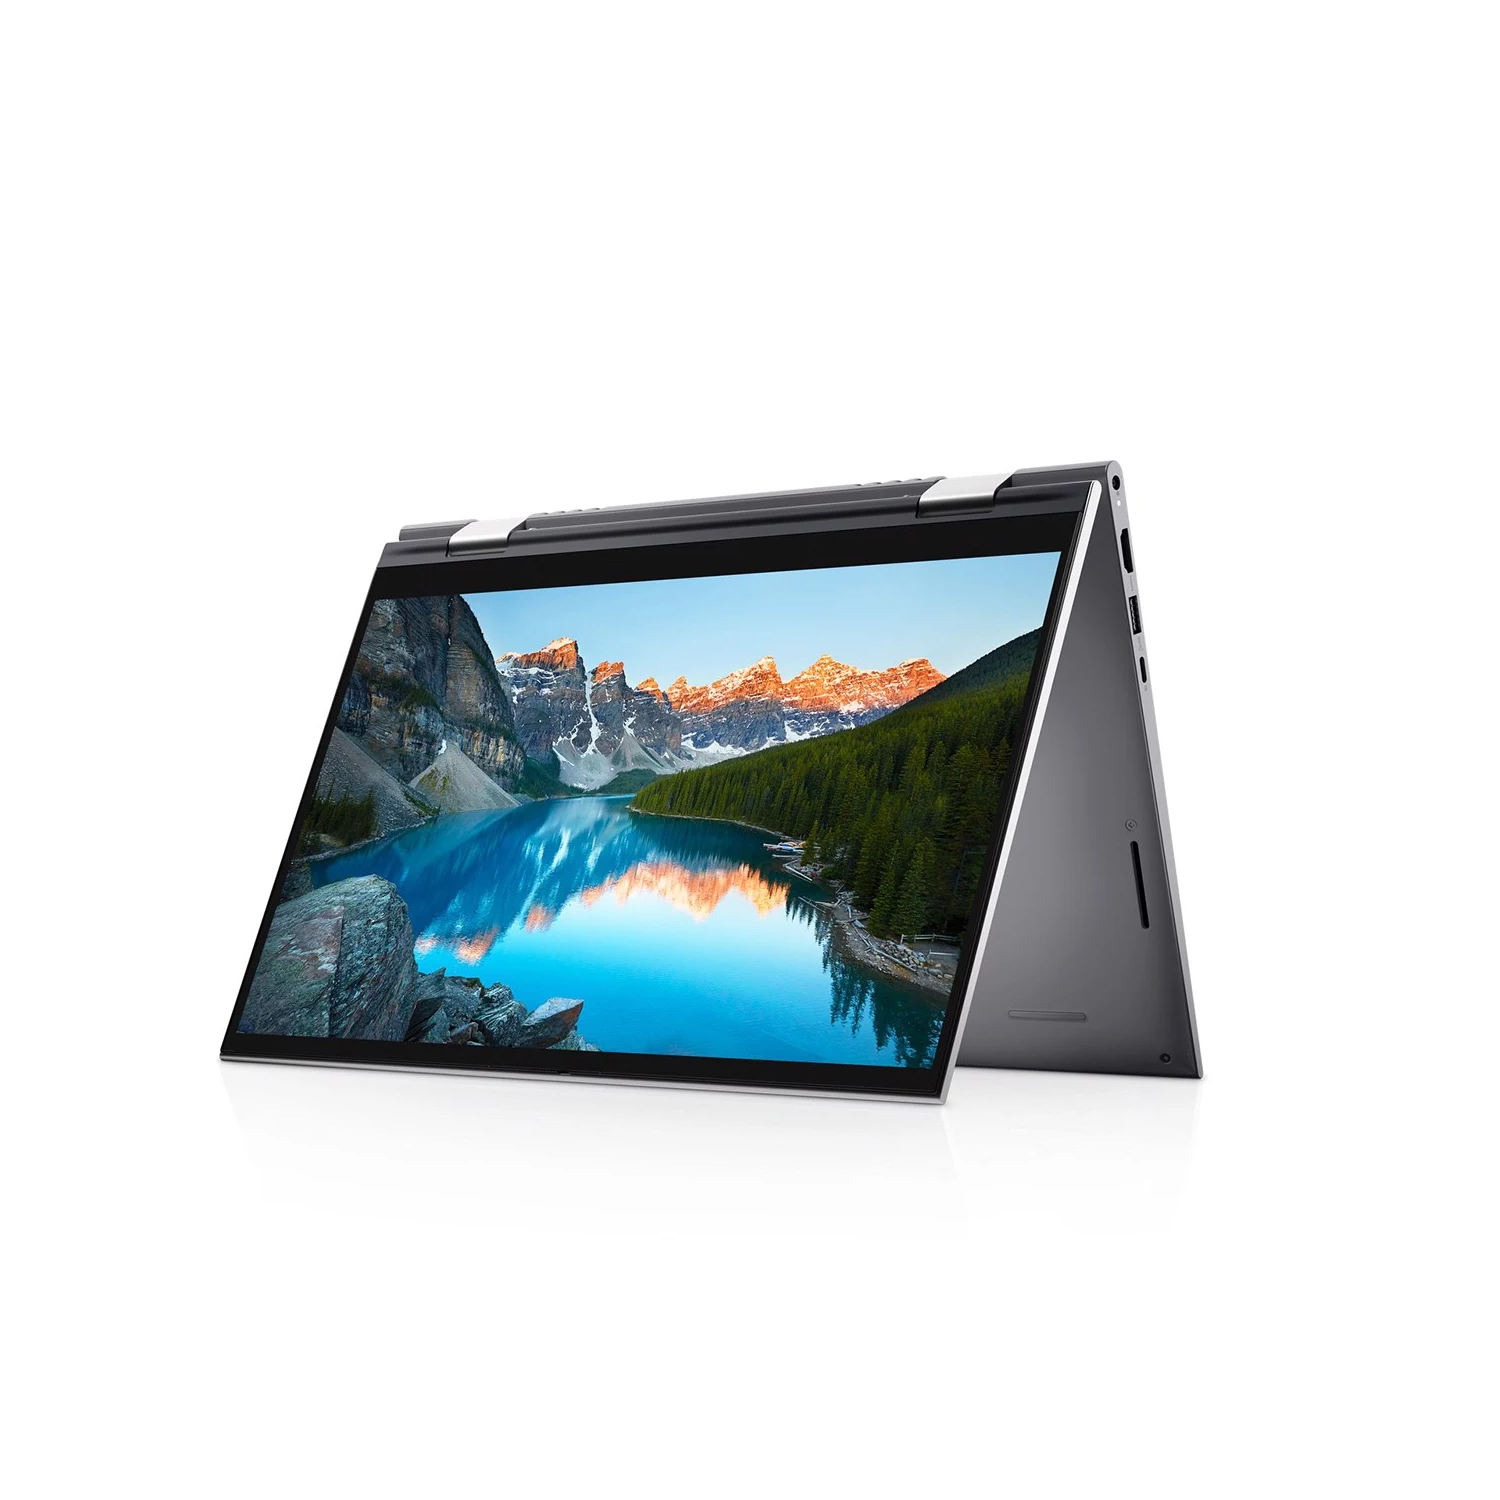 Dell Inspiron 14 5410 – Synnex FPT